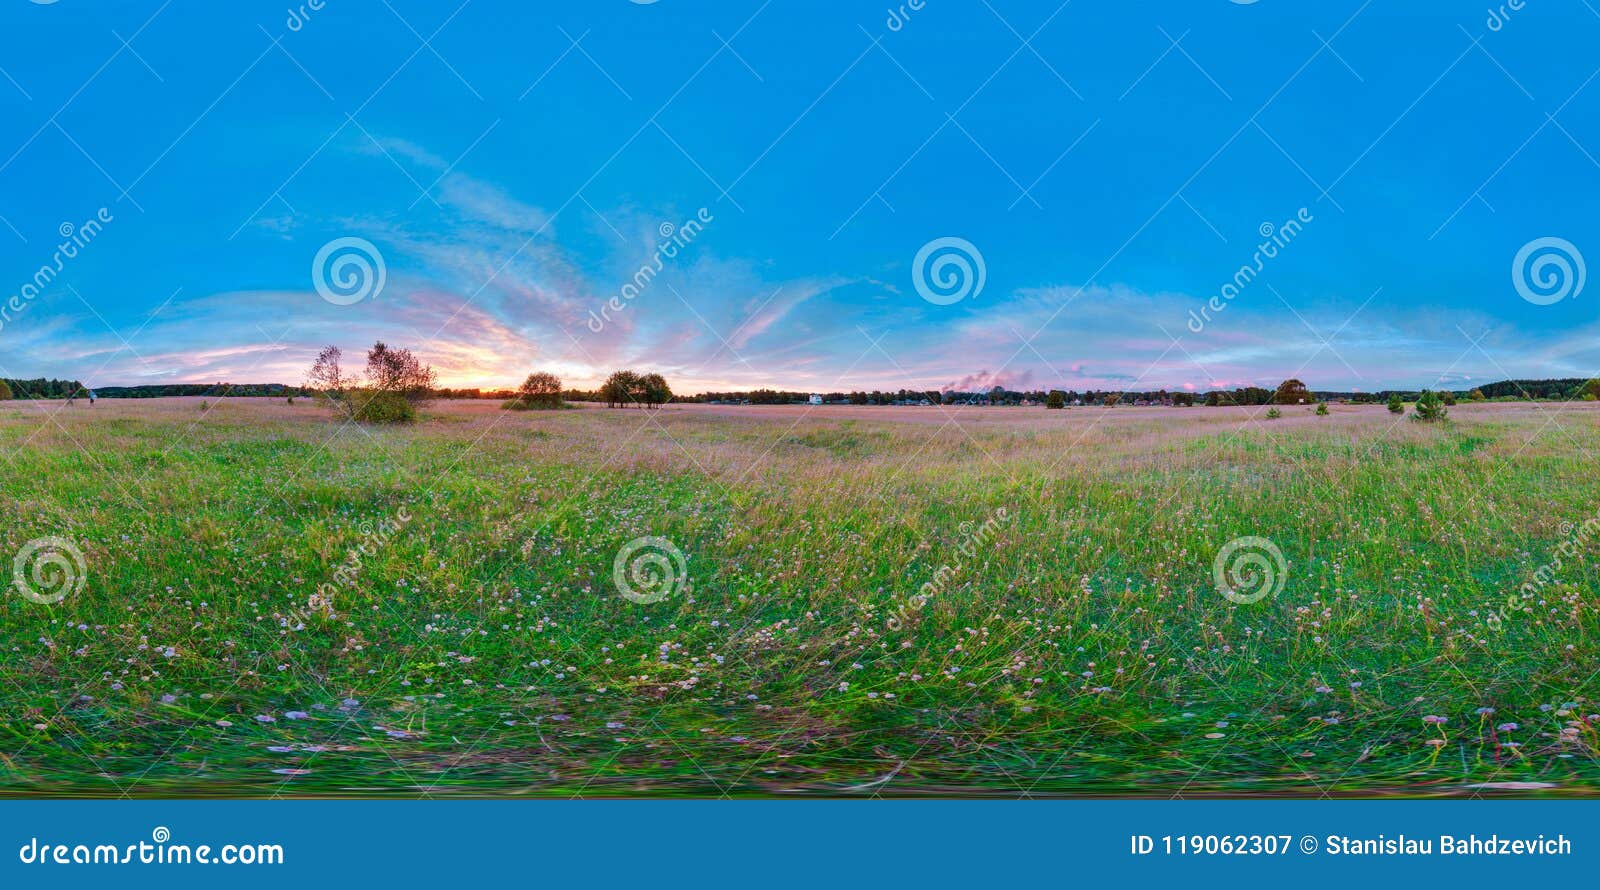 equirectangular 360 degree spherical panorama for virtual reality background beautiful sunrise at the field landscape blue sky